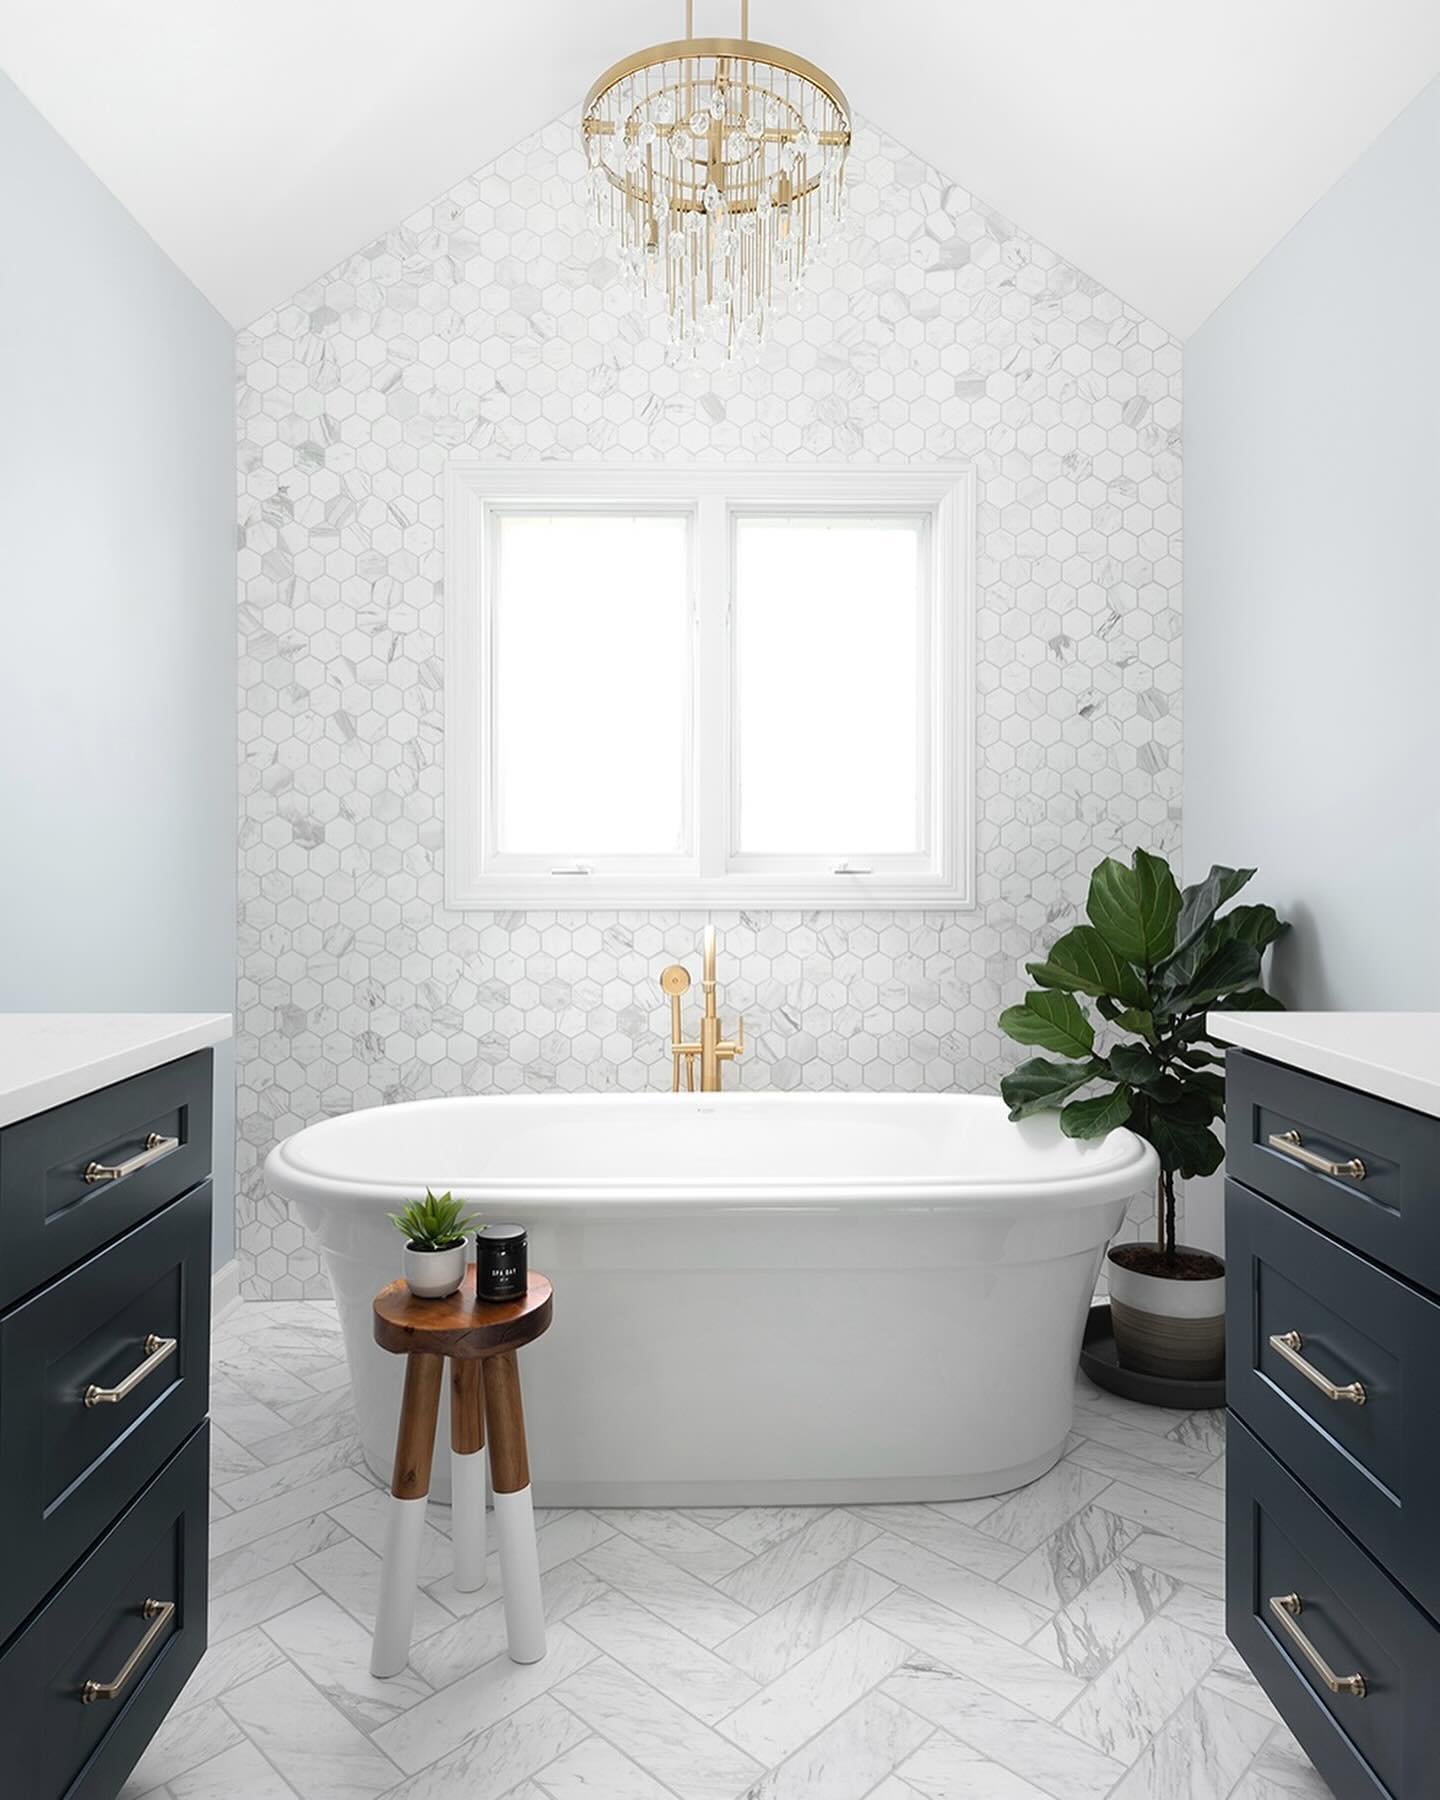 Happy Mother&rsquo;s Day weekend! Mamas, you have permission to take today and the weekend off. Or at least take a nice warm bath.

#cedPrettySerene
Photos by @pictureperfecthouse